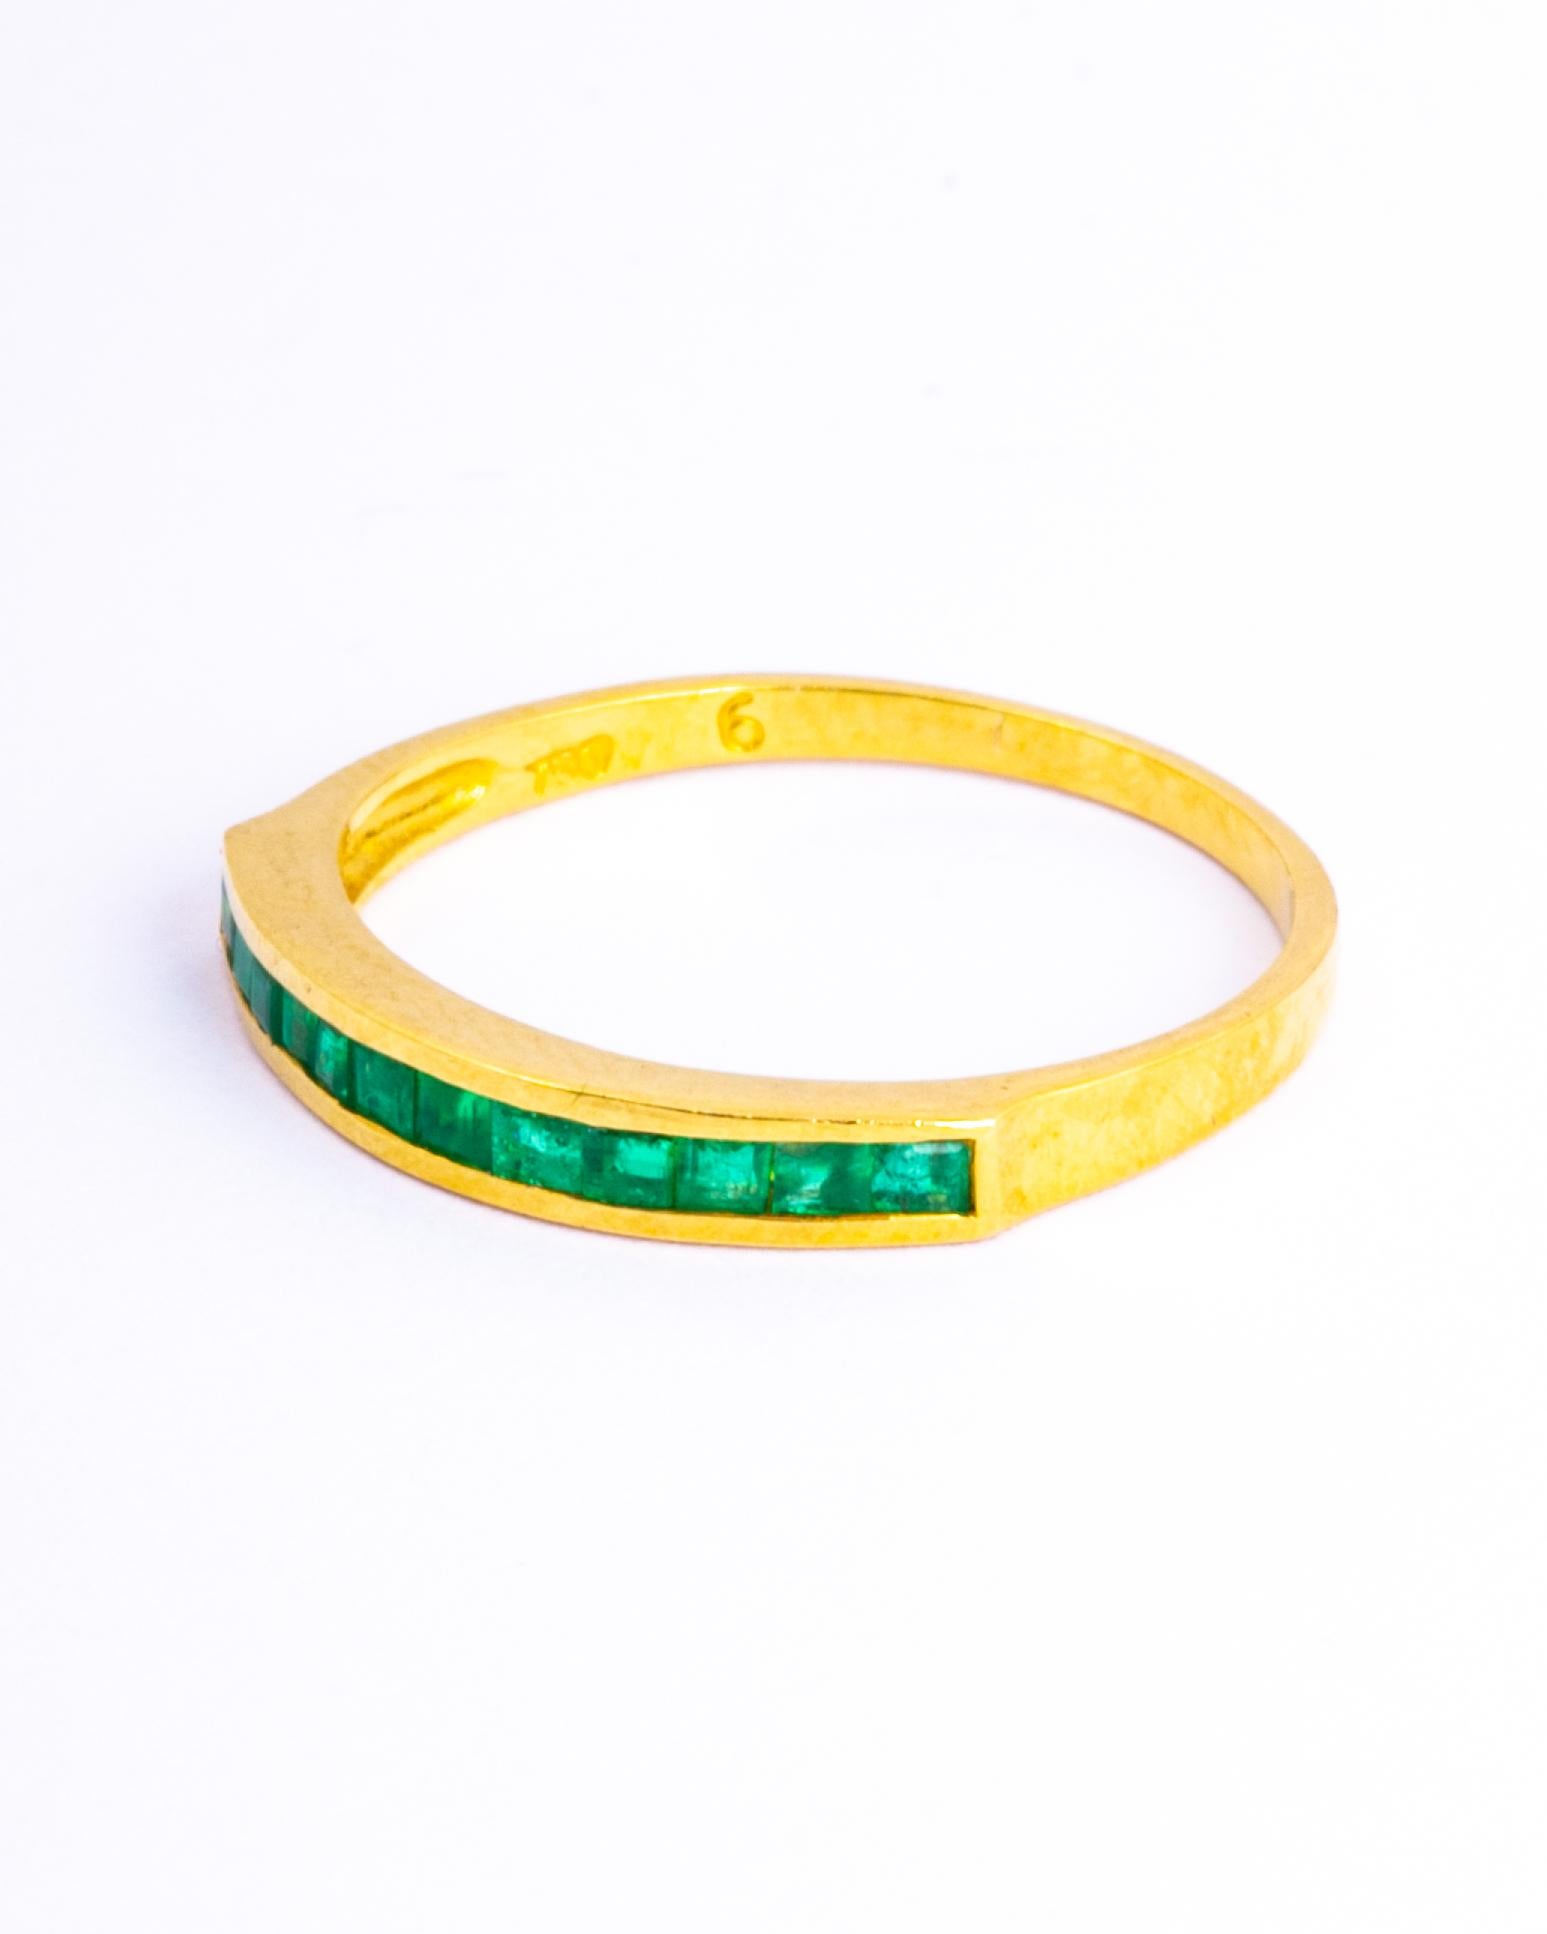 The emeralds set within this 9ct gold band are square cut and total approx 50pts. They have a great shine to them and are beautifully bright stones. 

Ring Size: M or 6 1/4 
Band Width: 2.5mm 

Weight: 2g